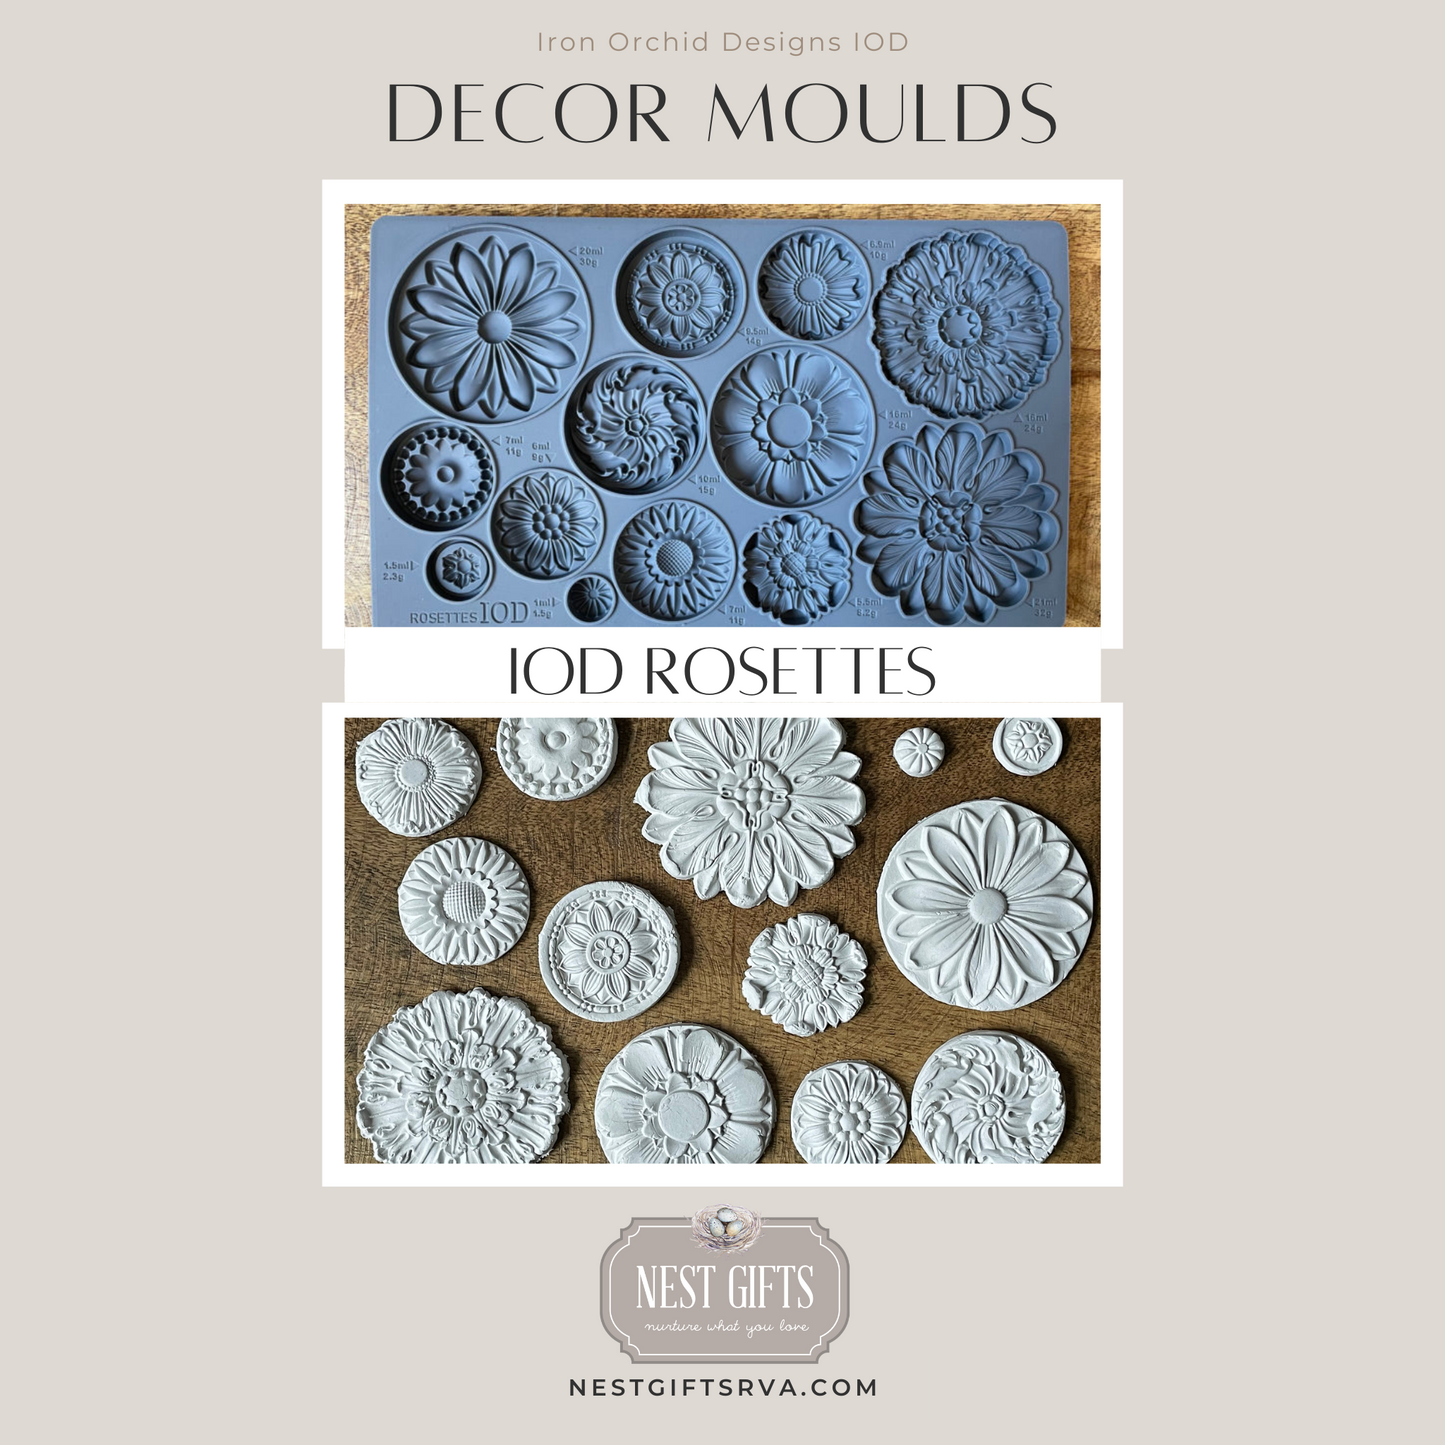 IOD Rosettes Moulds by Iron Orchid Designs